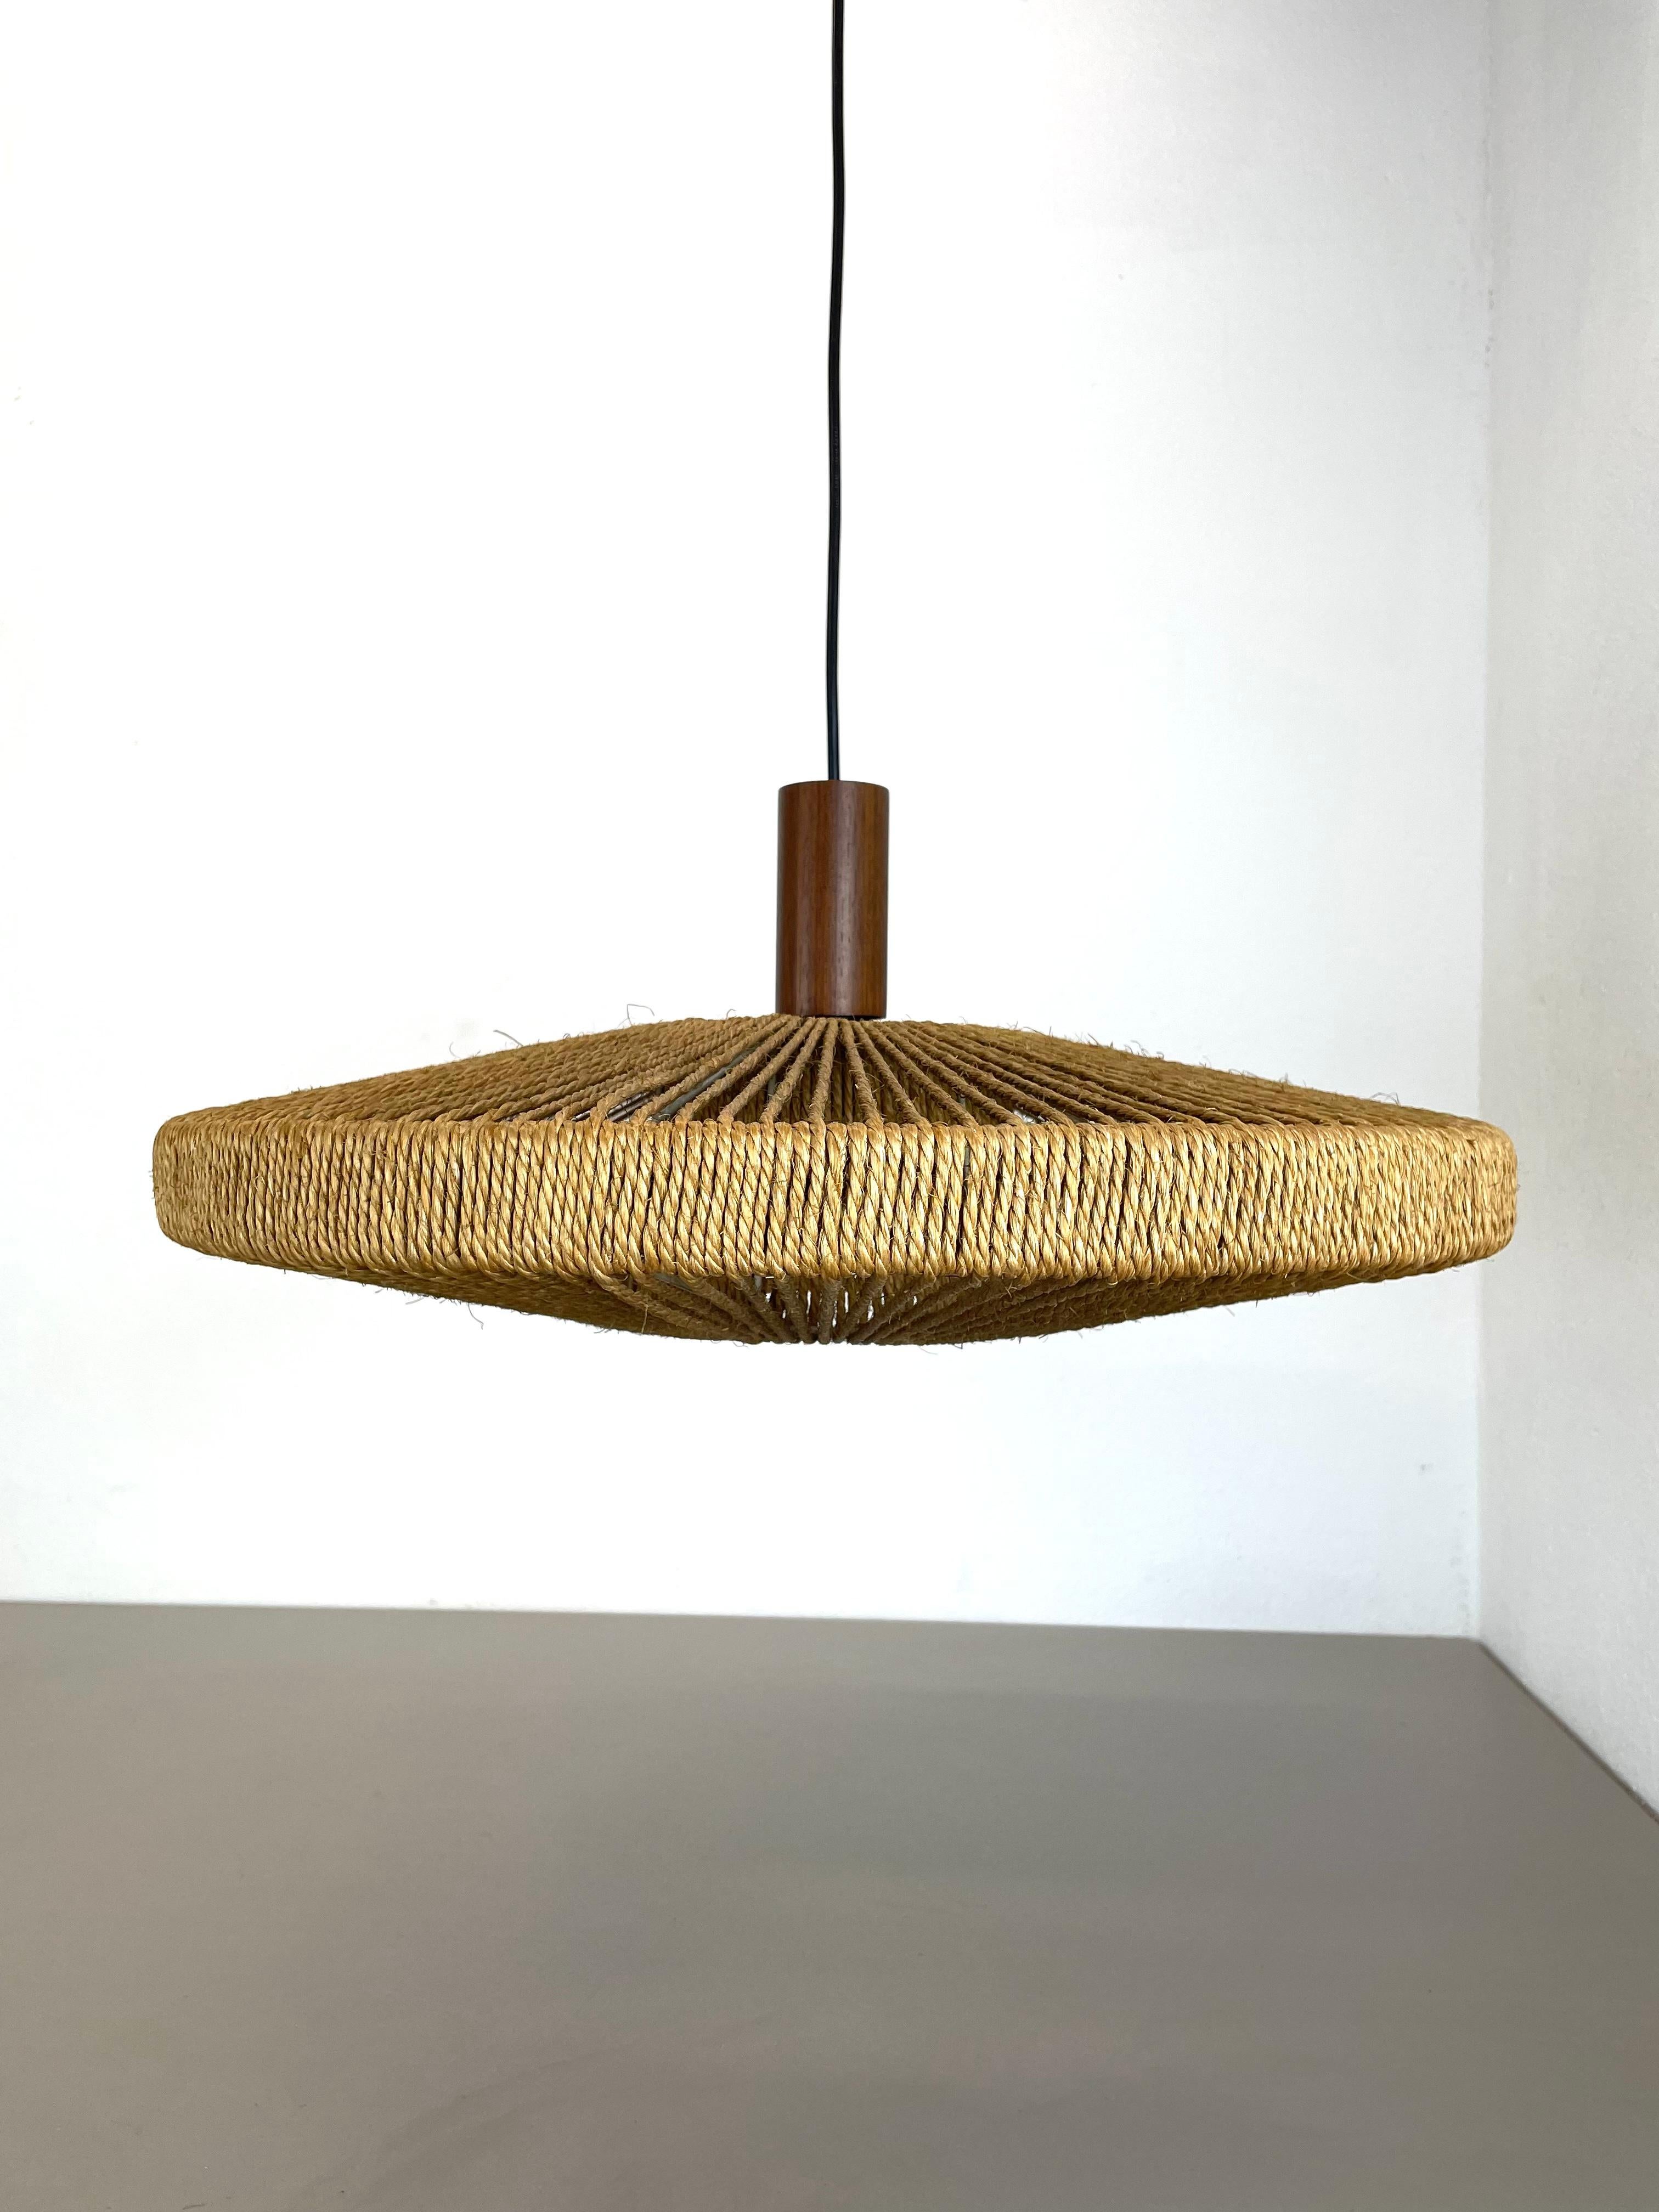 Article:
Hanging light
Producer:
TEMDE Lights, Germany
Origin:
Germany
Age:
1960s
Original vintage 1960s hanging light made in Germany. High quality German production with a ufo formed metal frame covered by a sisal structure. The object was